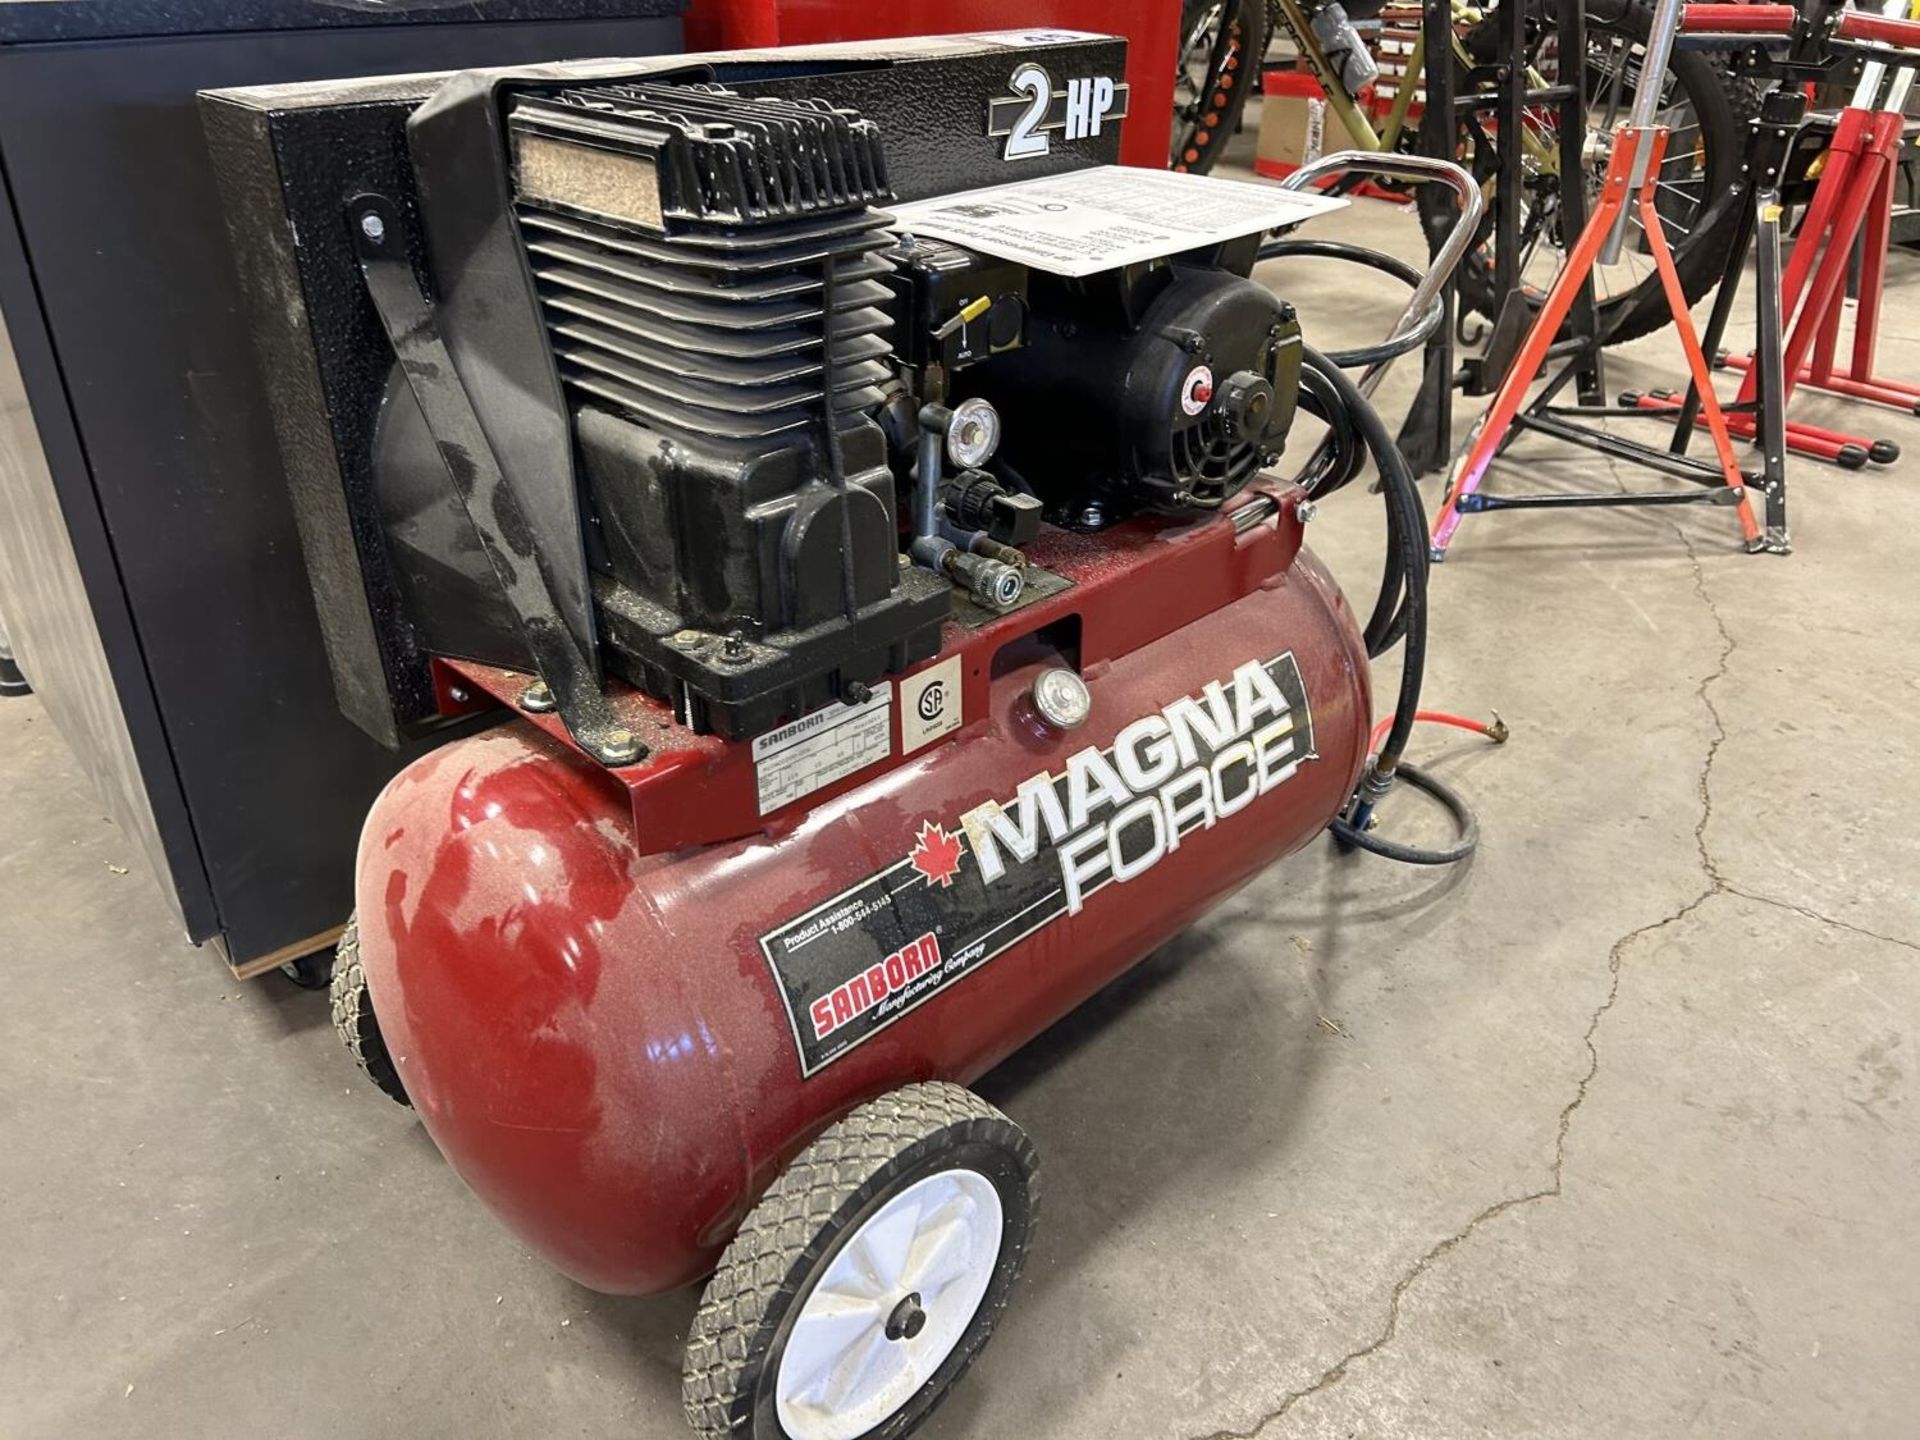 SANBORN MAGNA FORCE 2 HP AIR COMPRESSOR W/ HOSE AND AIR CHUCK - Image 3 of 4